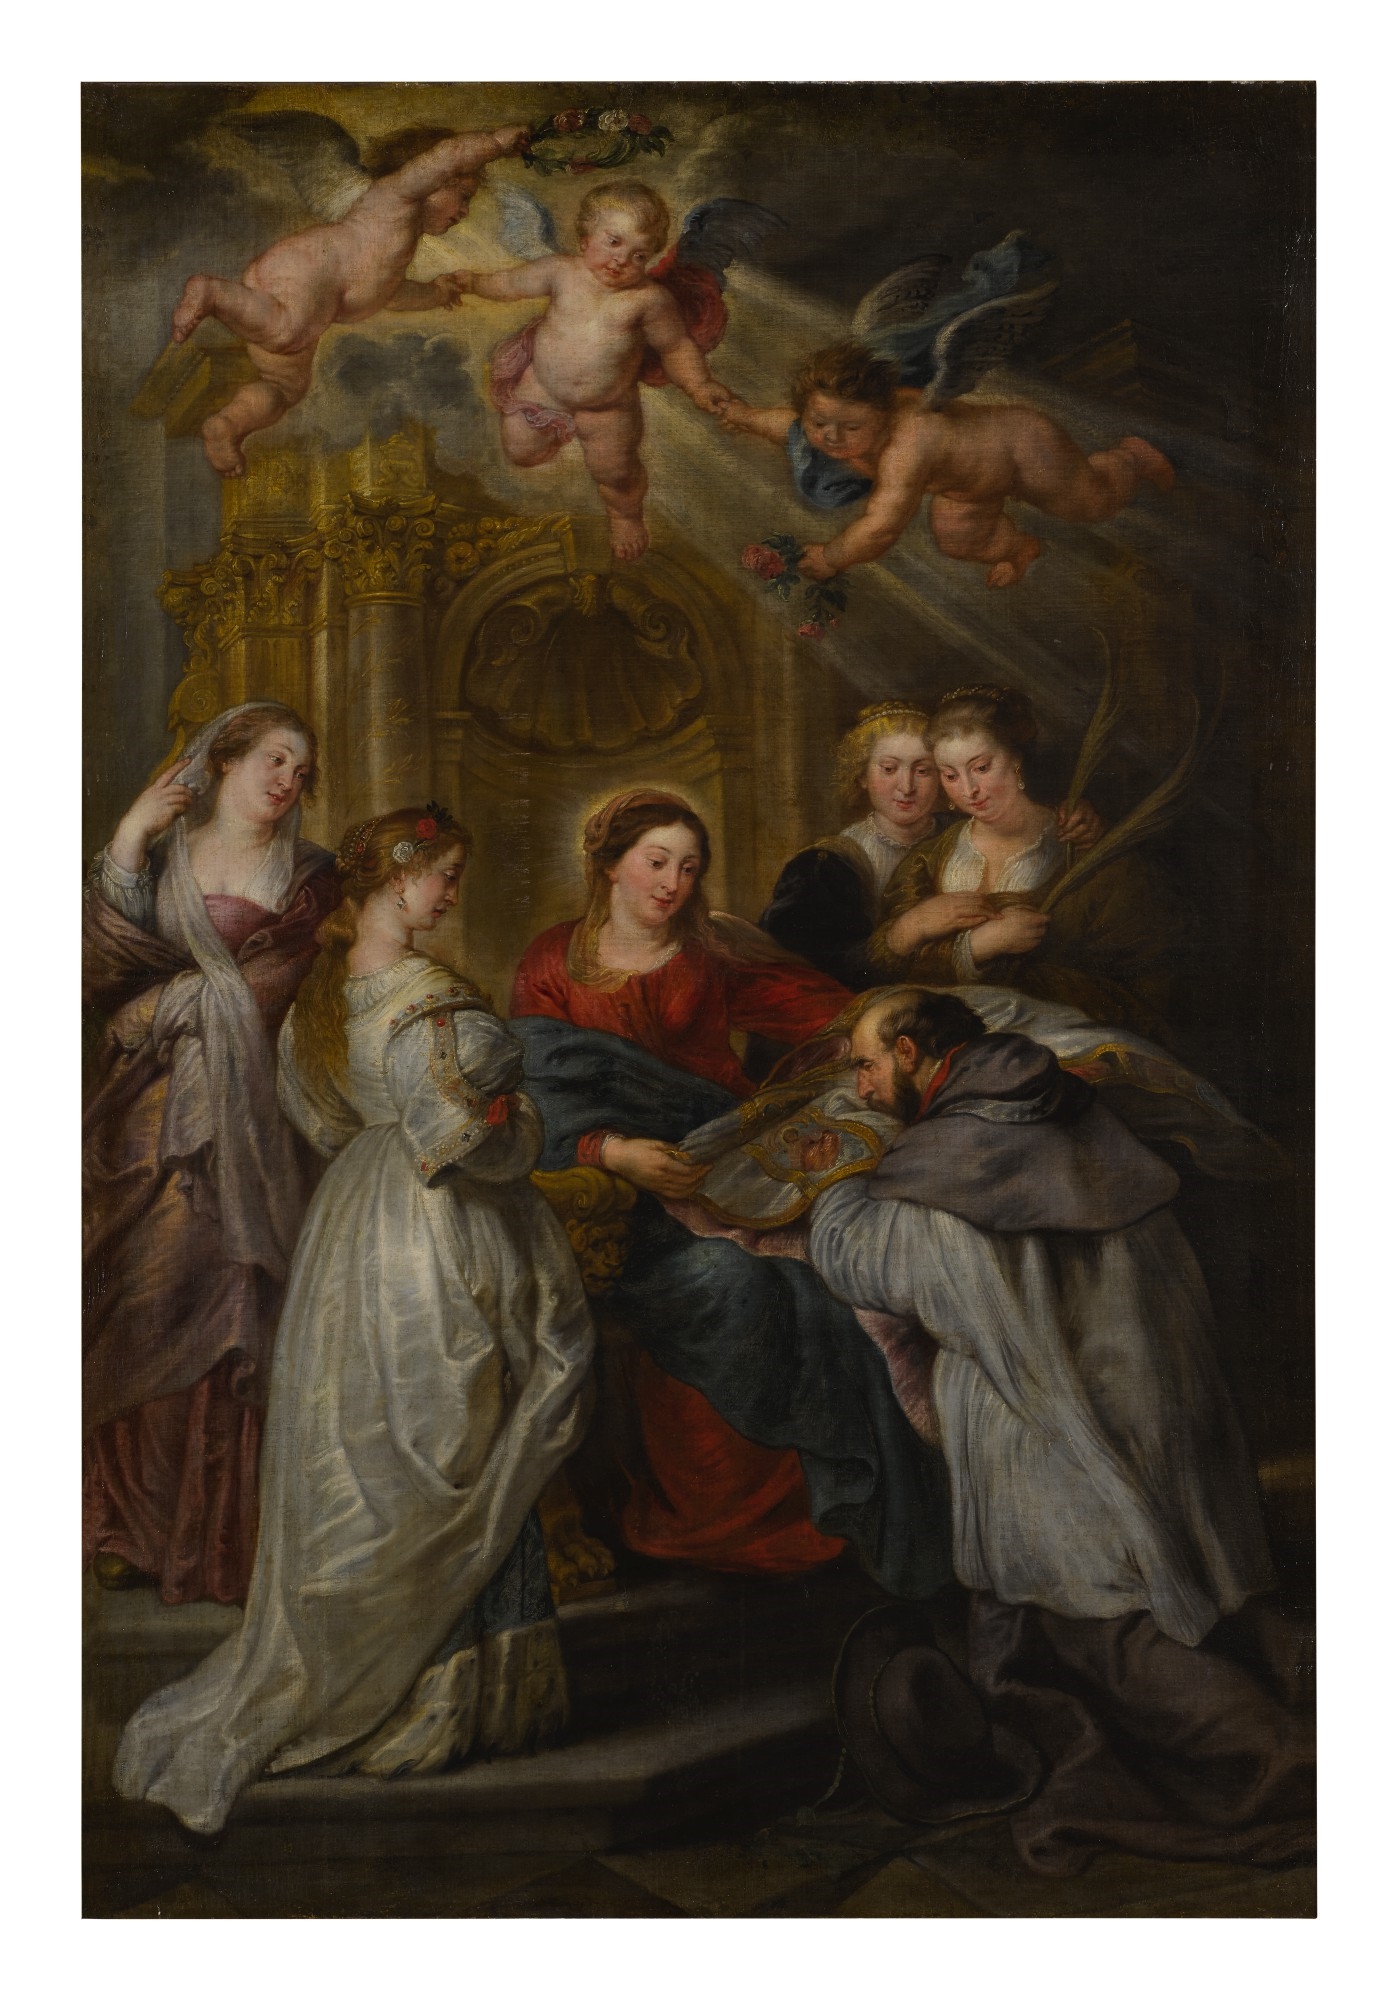 SAINT ILDEFONSO RECEIVING THE CHASUBLE FROM THE VIRGIN by Peter Paul Rubens